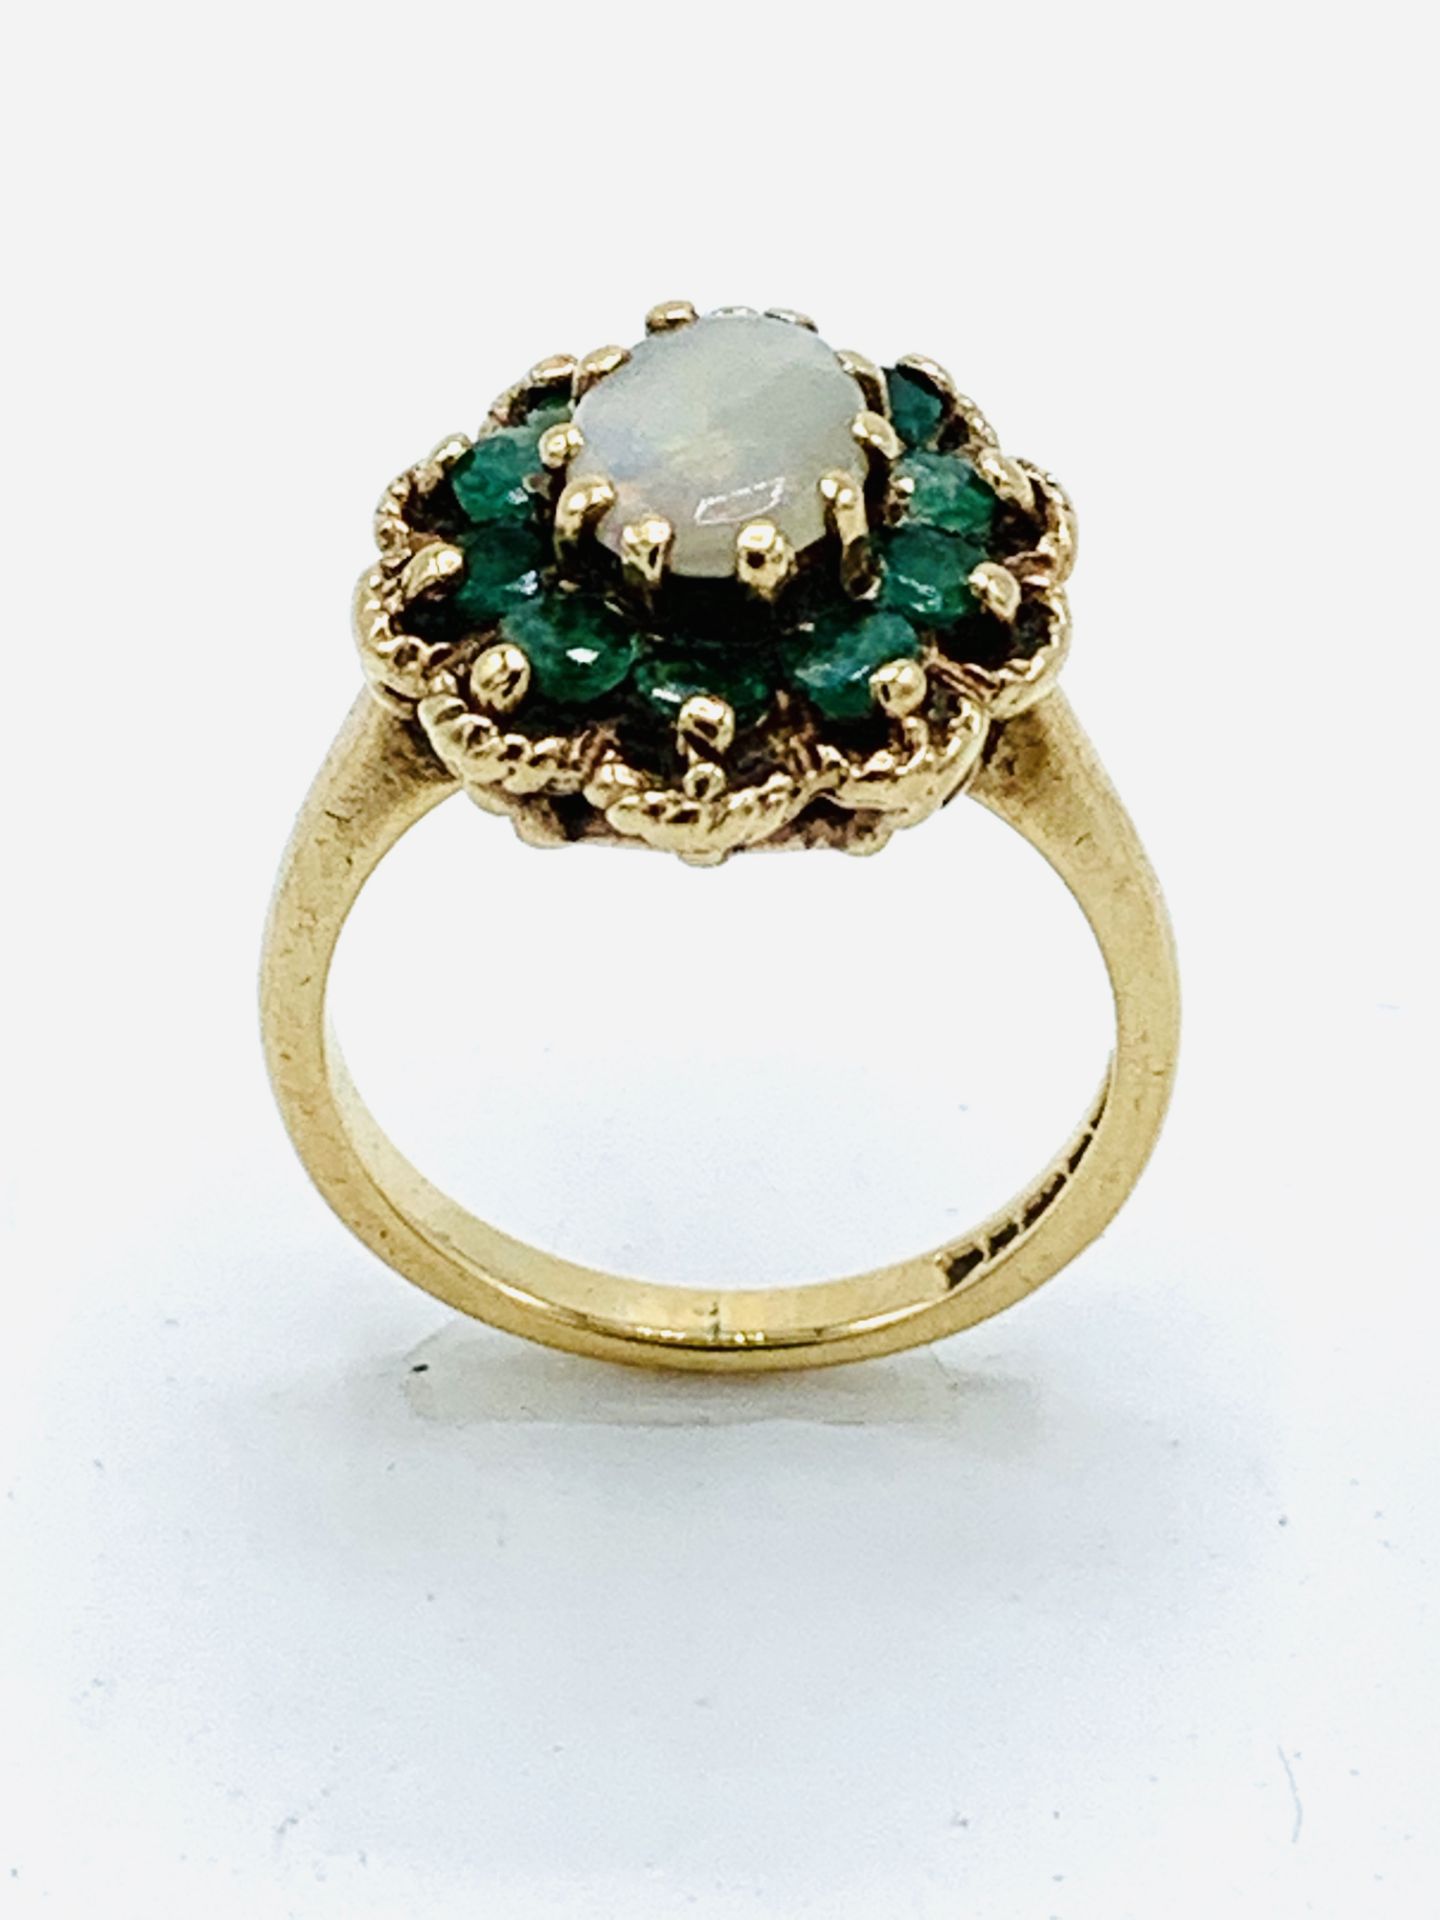 9ct gold, opal and pale green stone ring, 4.5gms - Image 4 of 5